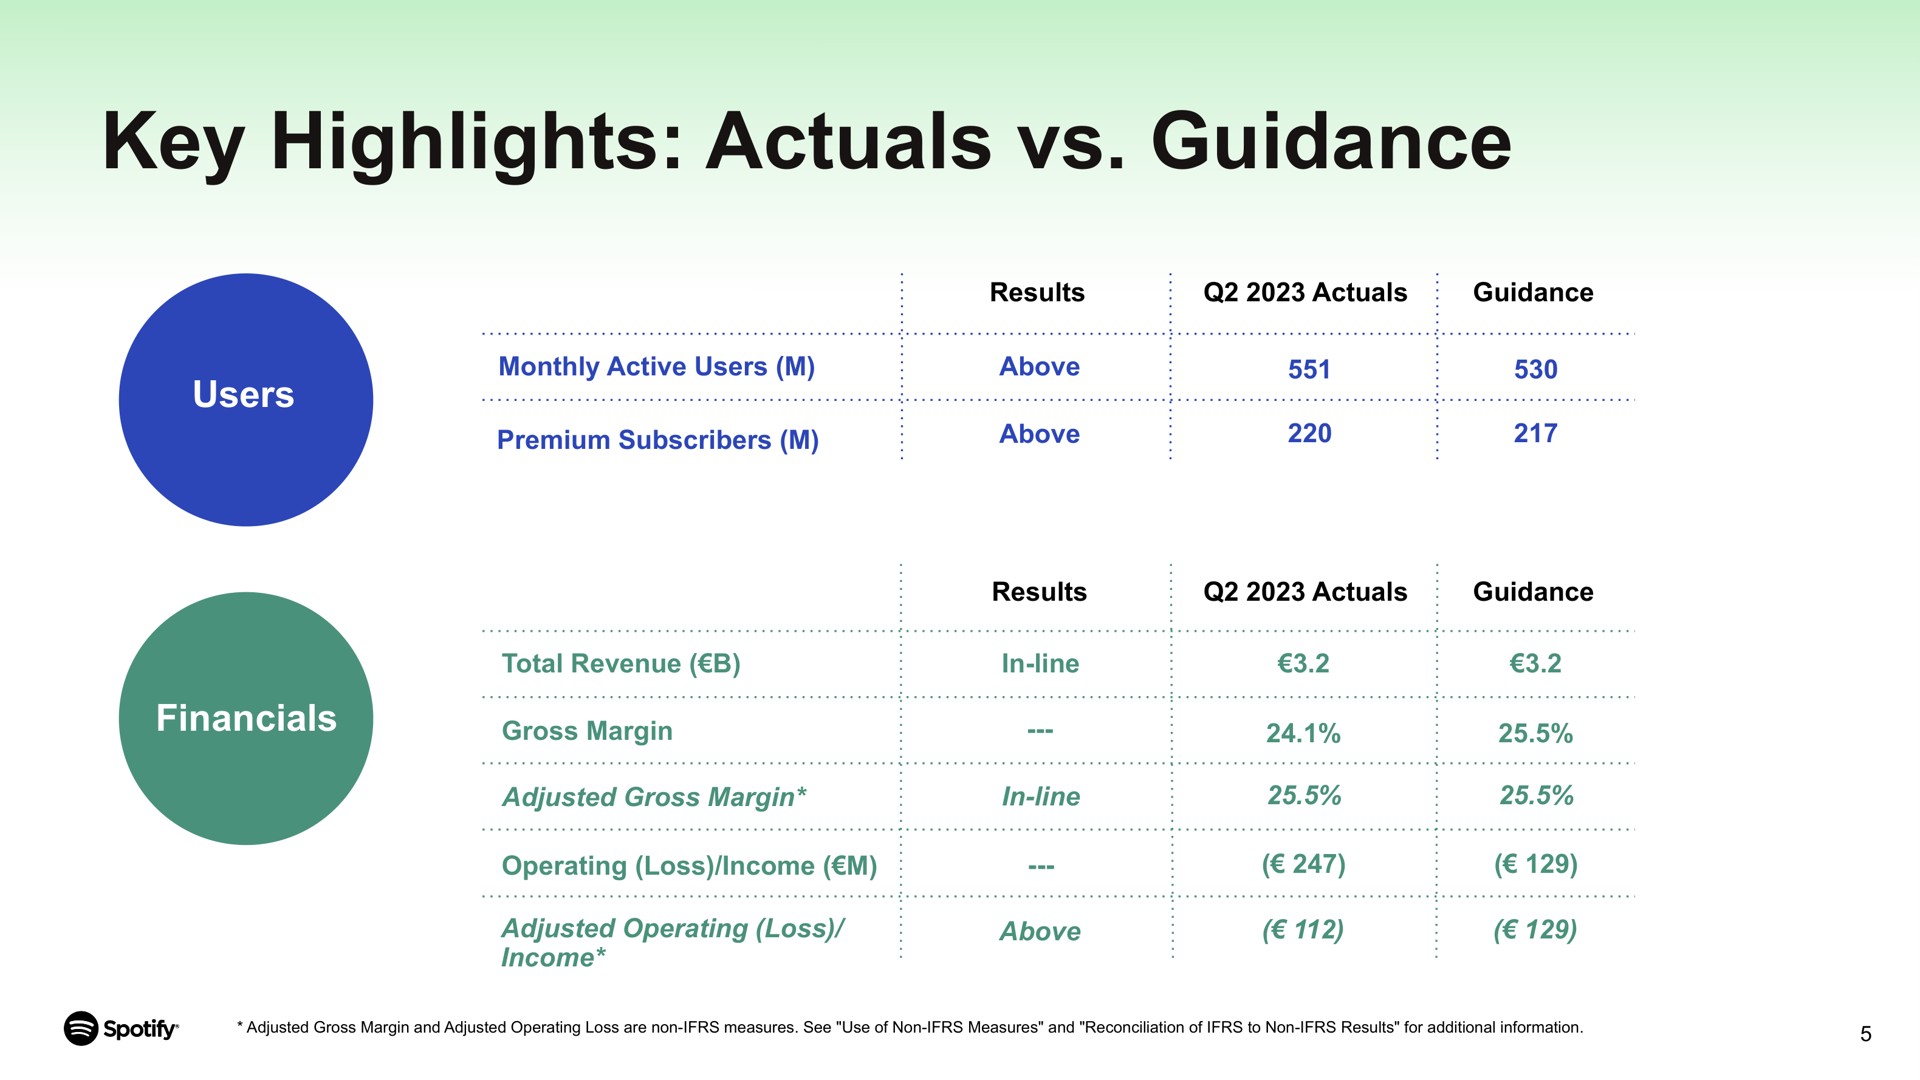 key highlights guidance users monthly active i a results an pone eons coe premium subscribers i above a nice results bids a i a me grows wren one no aes eons i a a income | Spotify